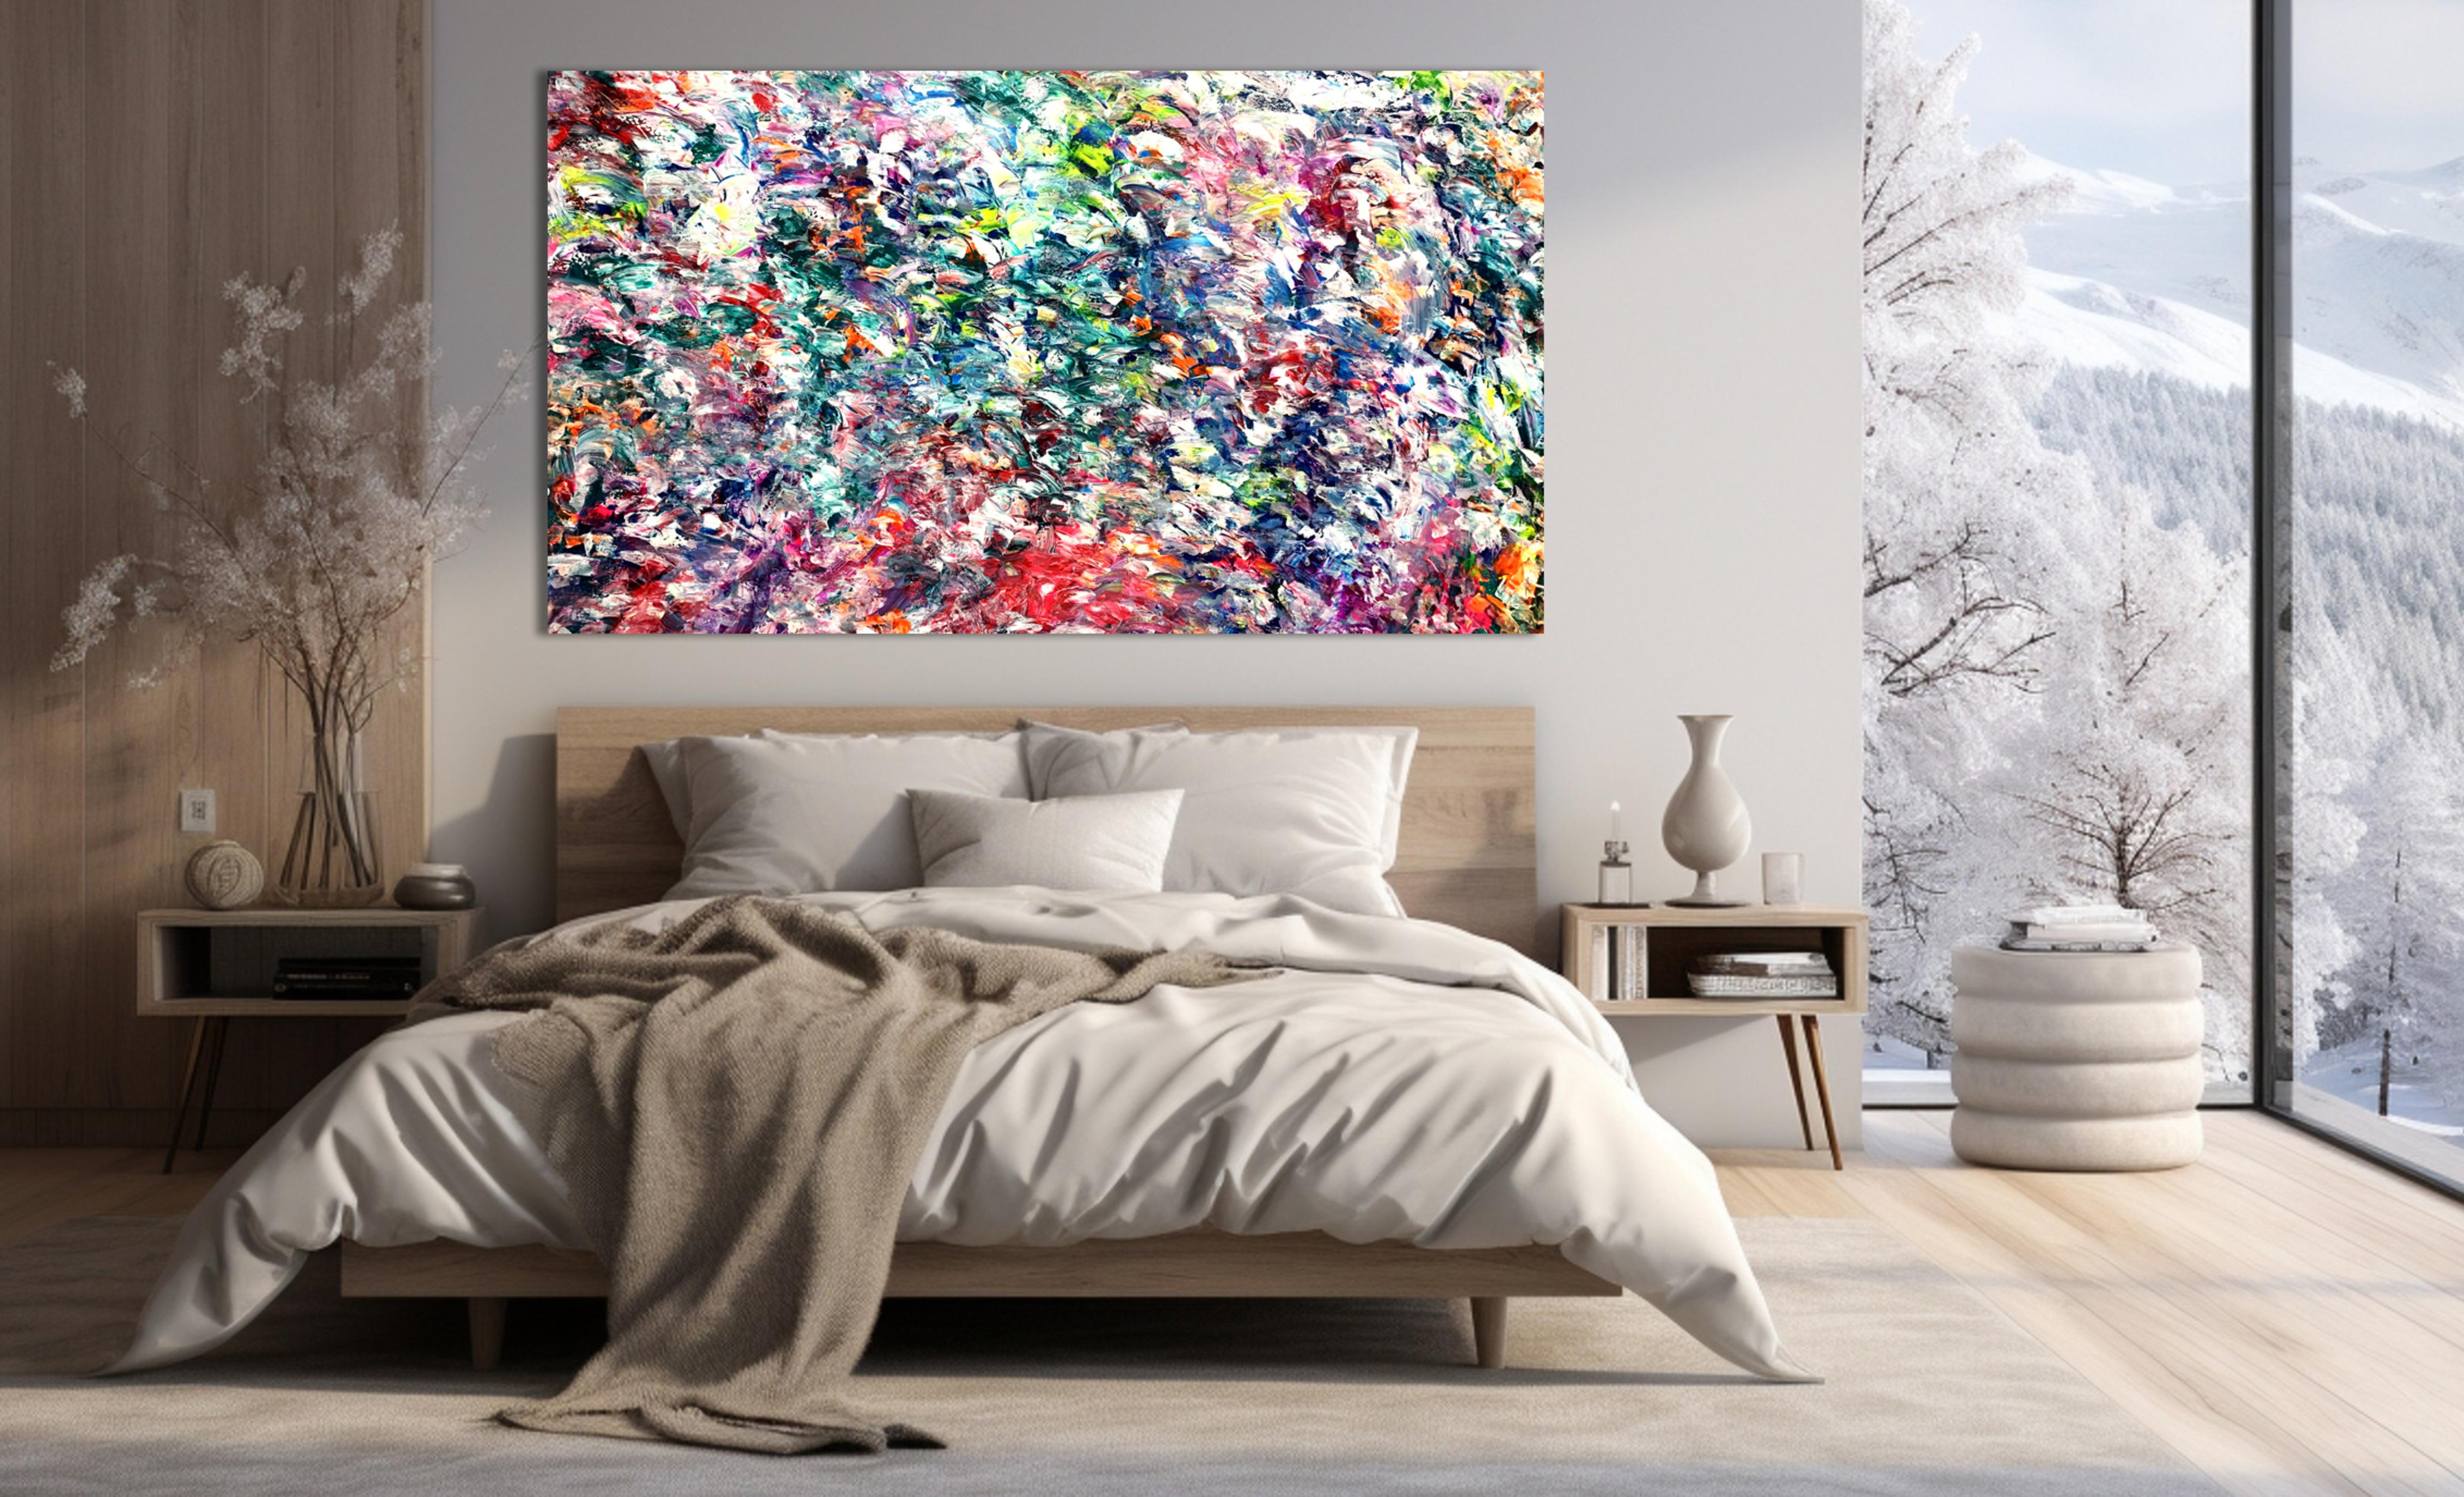 Snow Covered Landscape - Abstract Expressionist Painting by Estelle Asmodelle